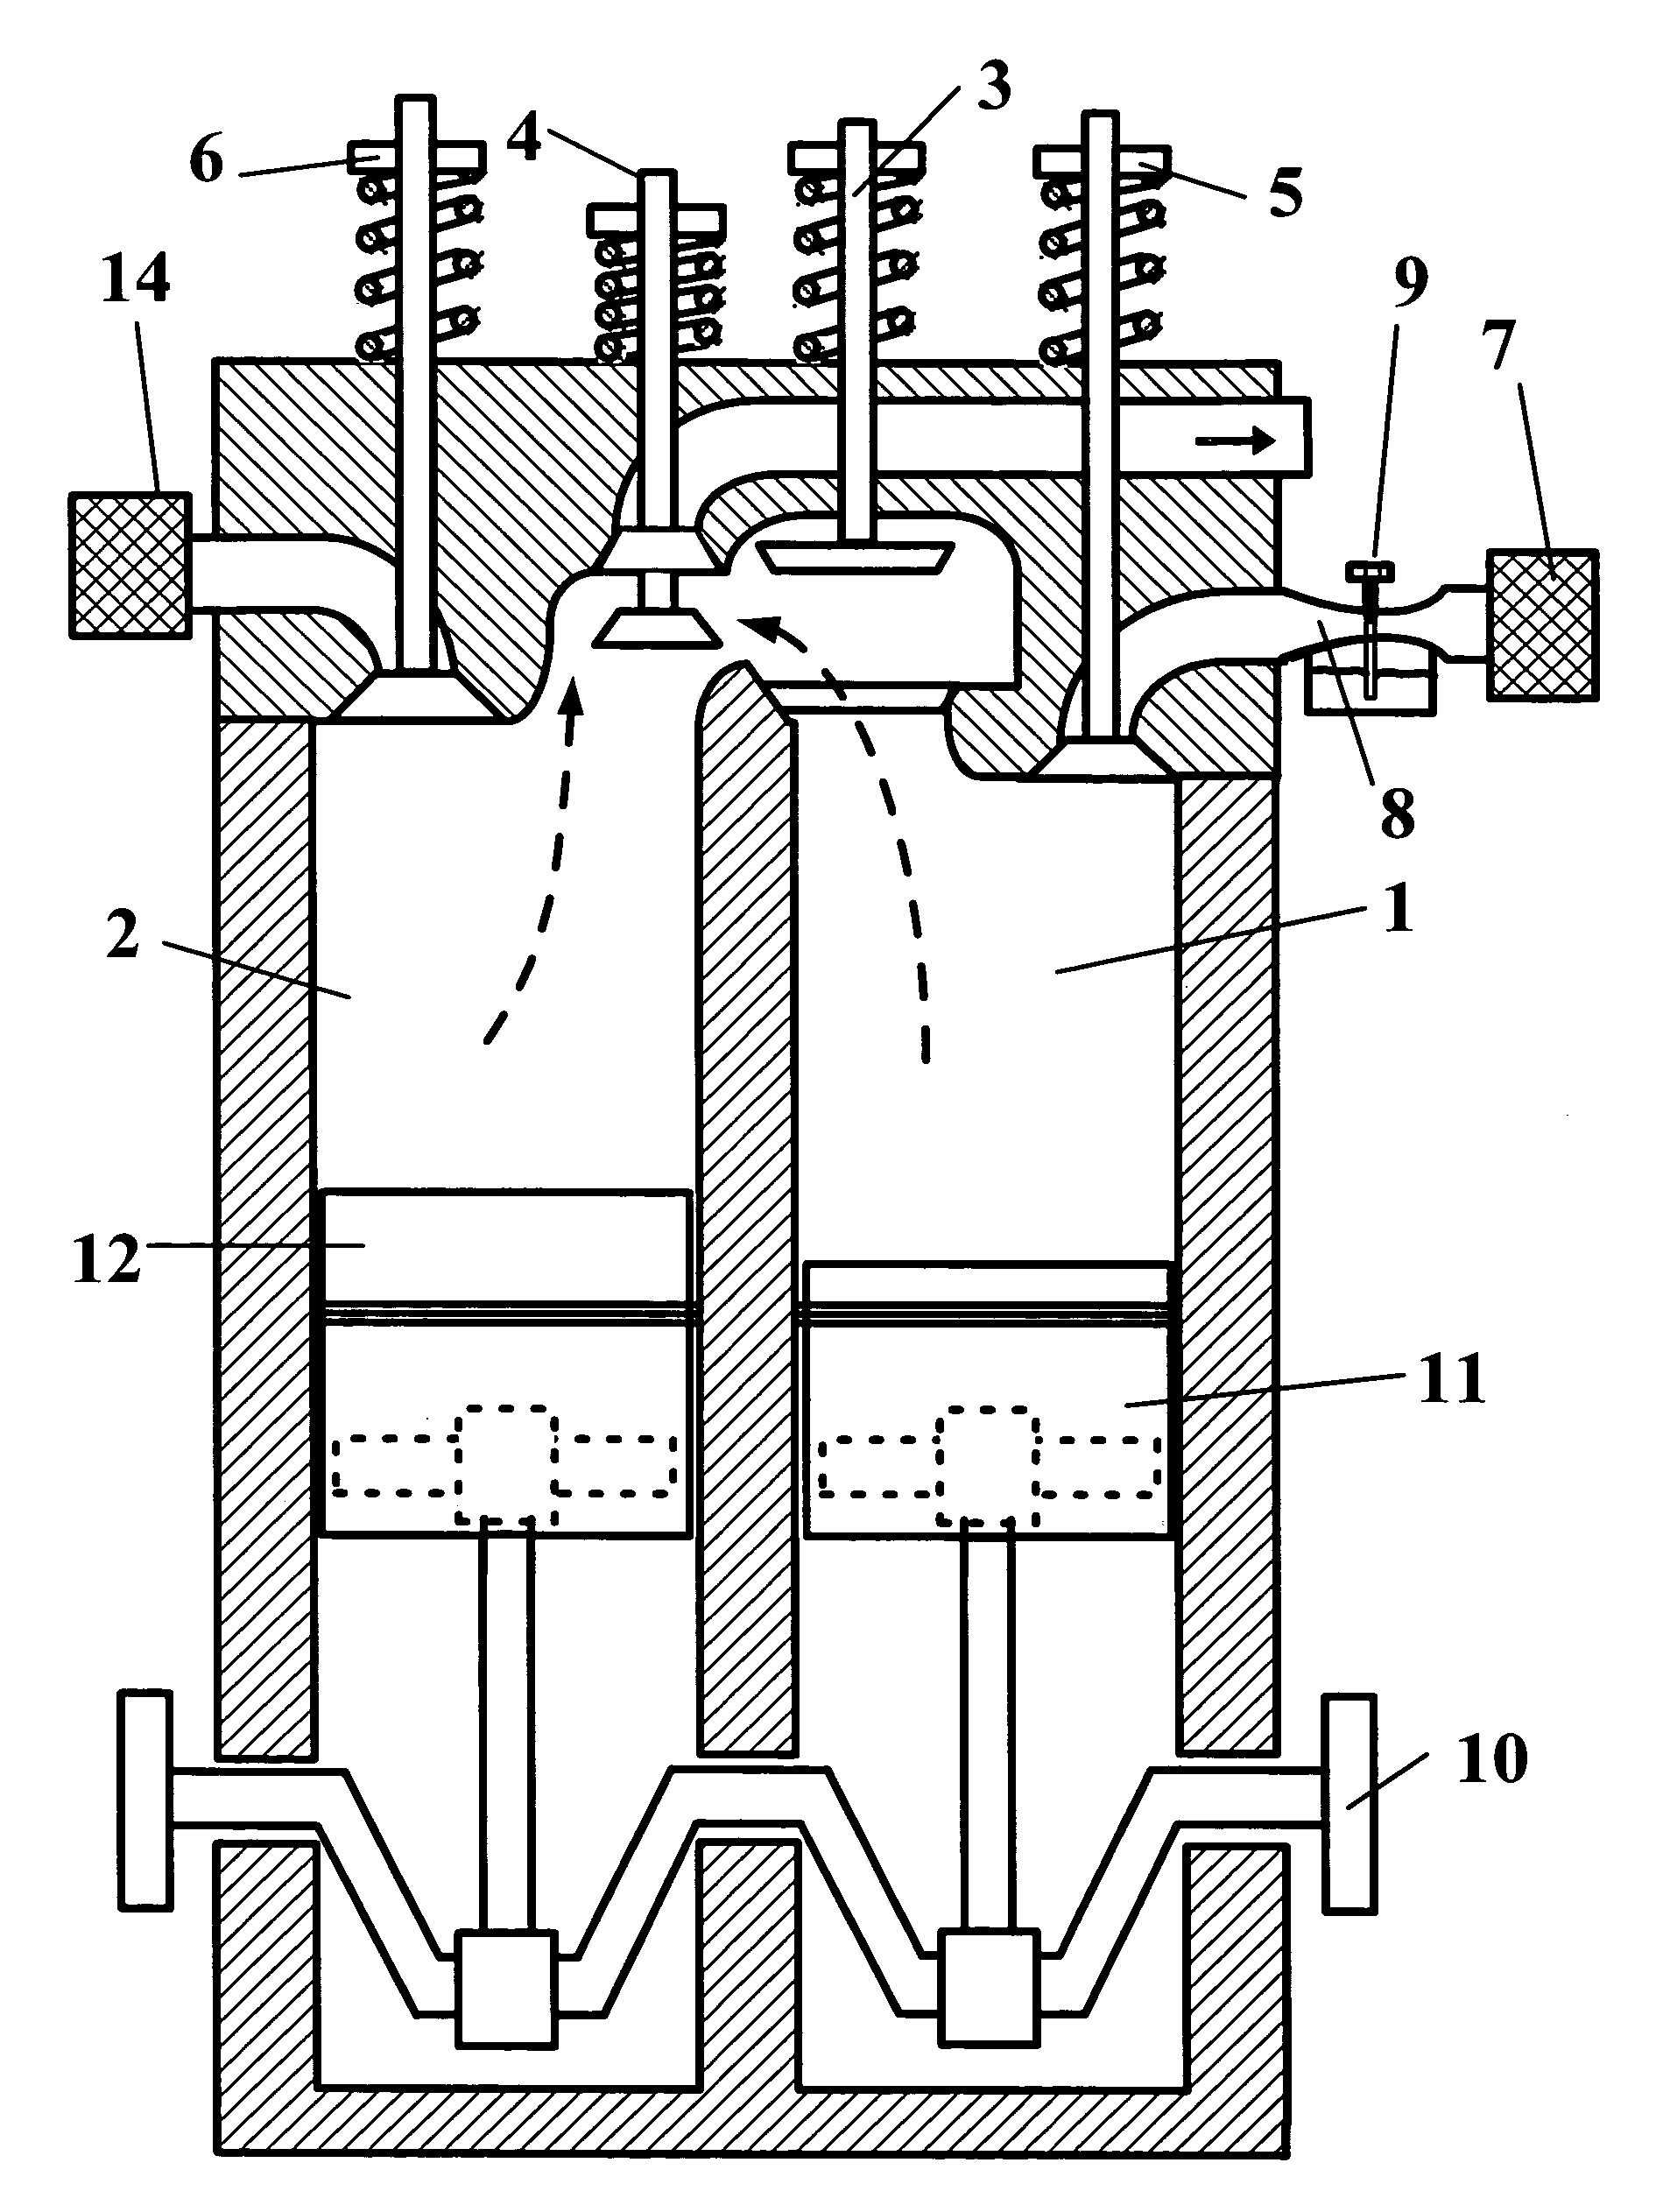 Compression ignition engine by air injection from air-only cylinder to adjacent air-fuel cylinder